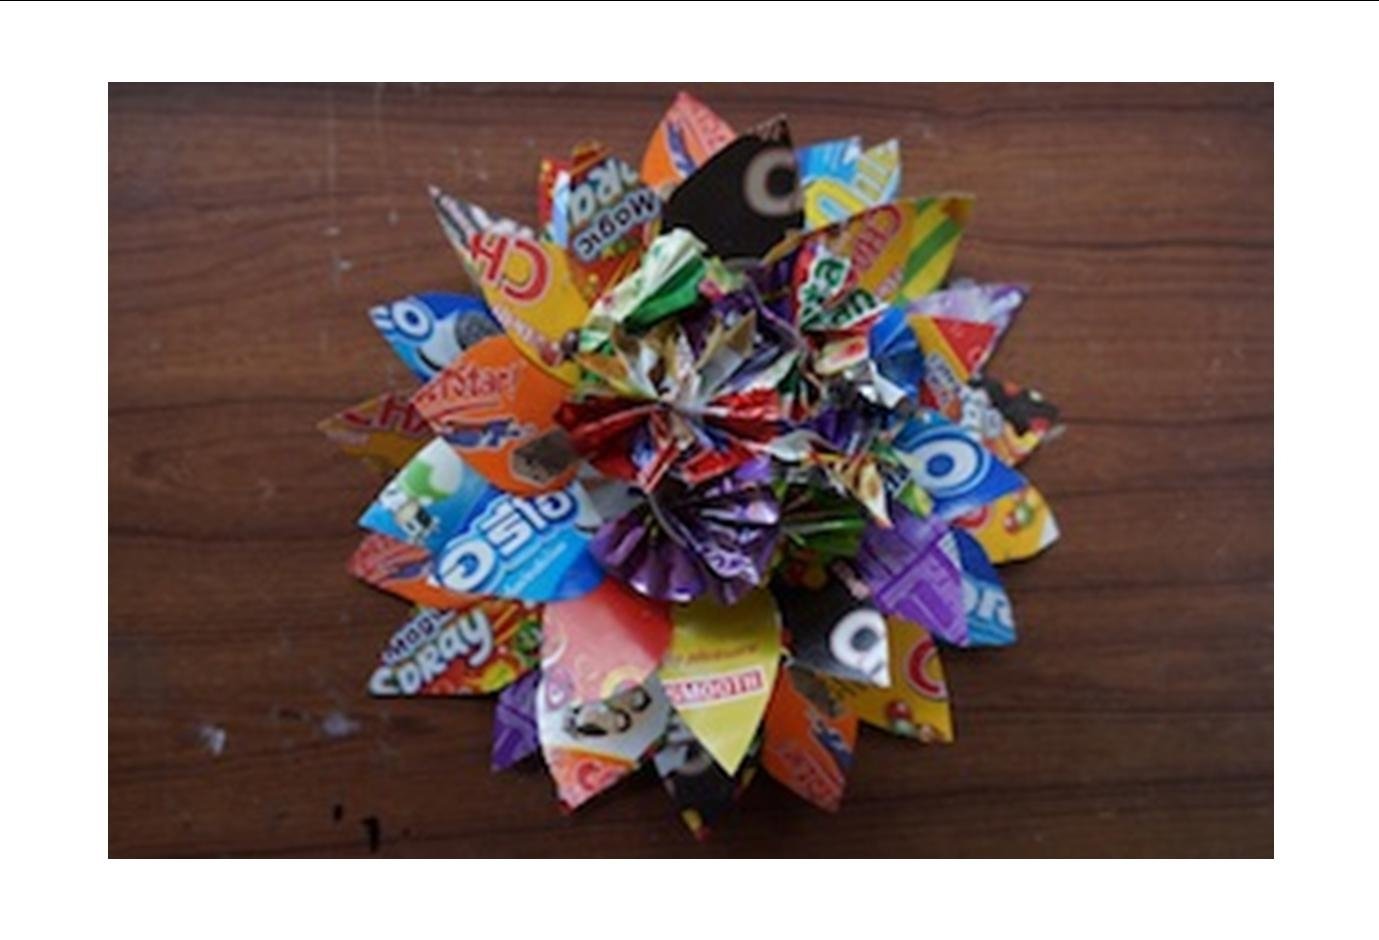 10 Awesome Recycled Projects For School Ideas recycled products school project nusa penida 2012 jan jun 2022